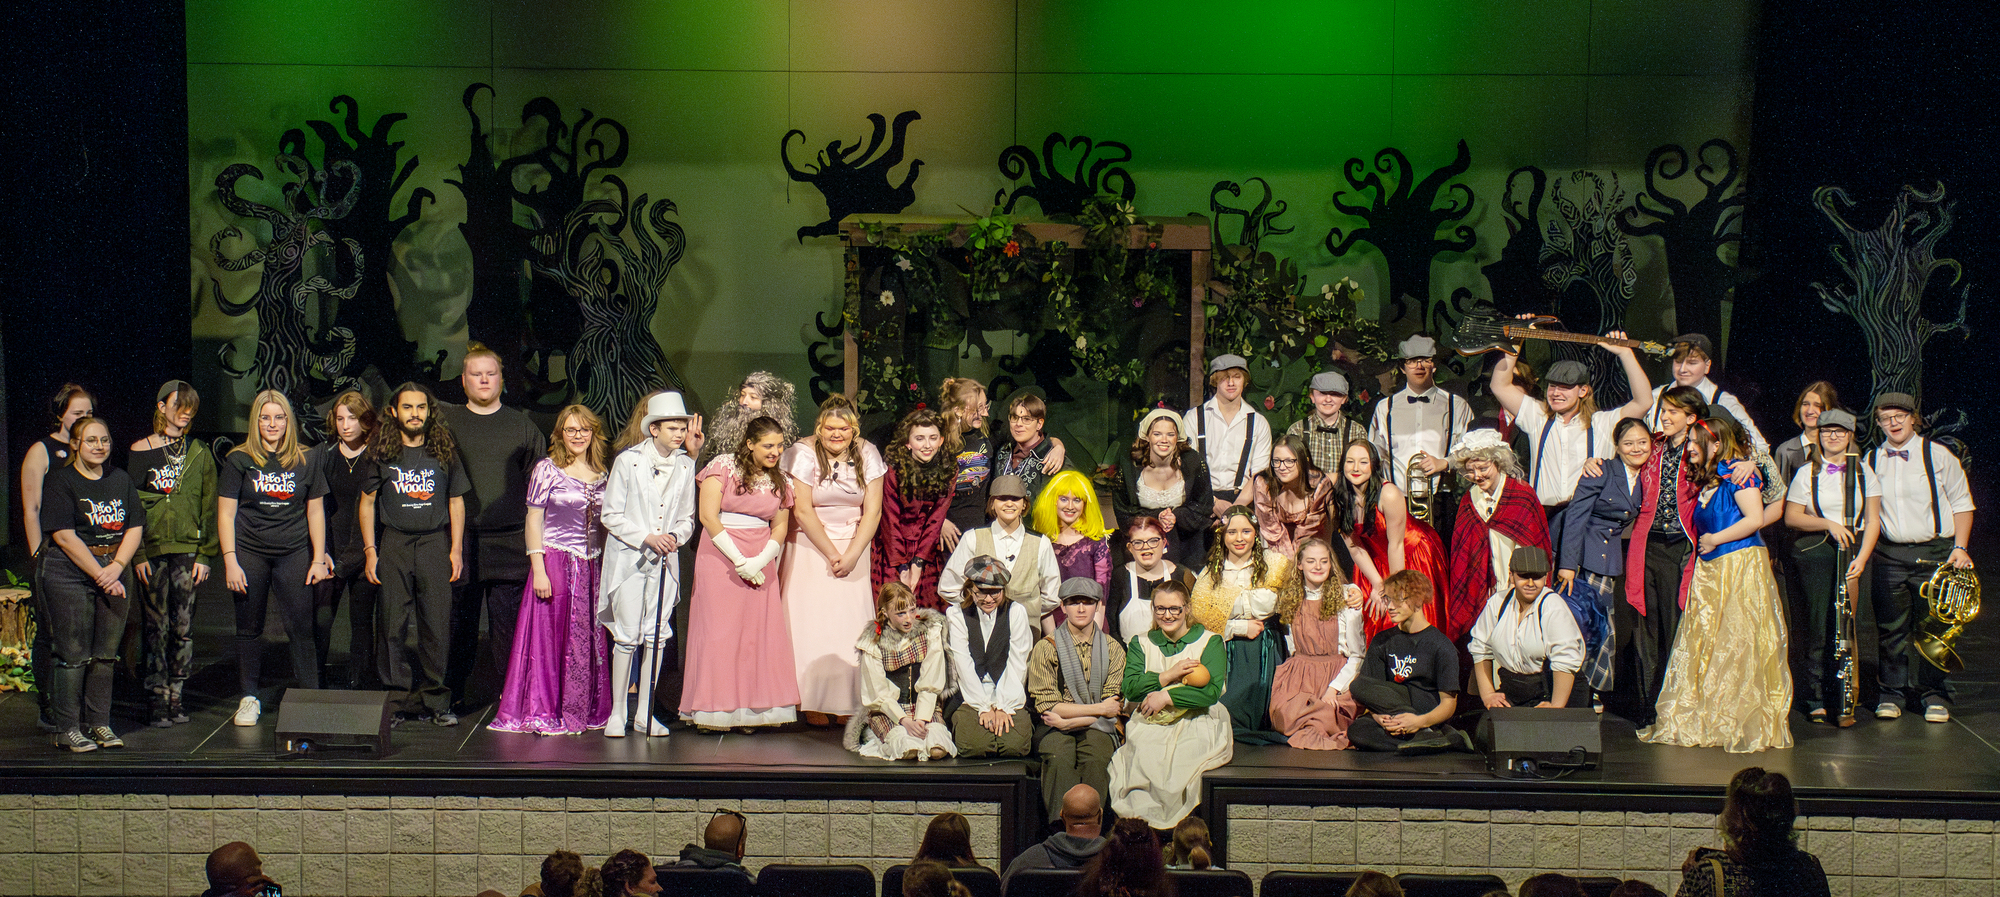 Cast and Crew from the performance "Into the Woods"